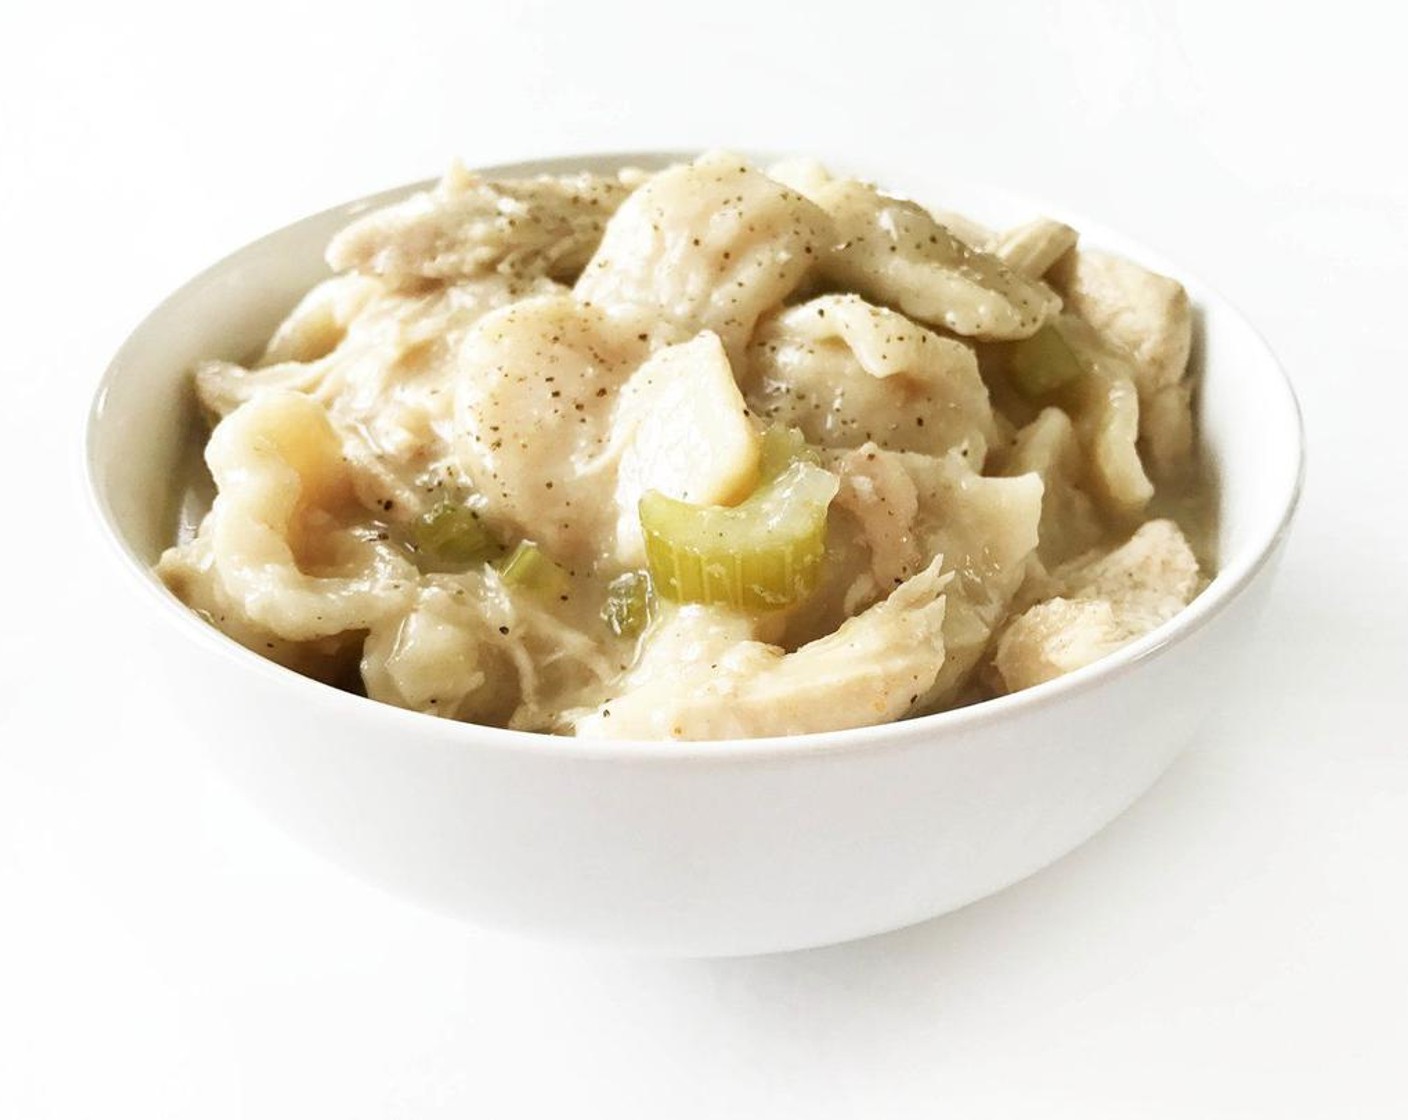 Grandma's Old-Fashioned Chicken and Dumplings